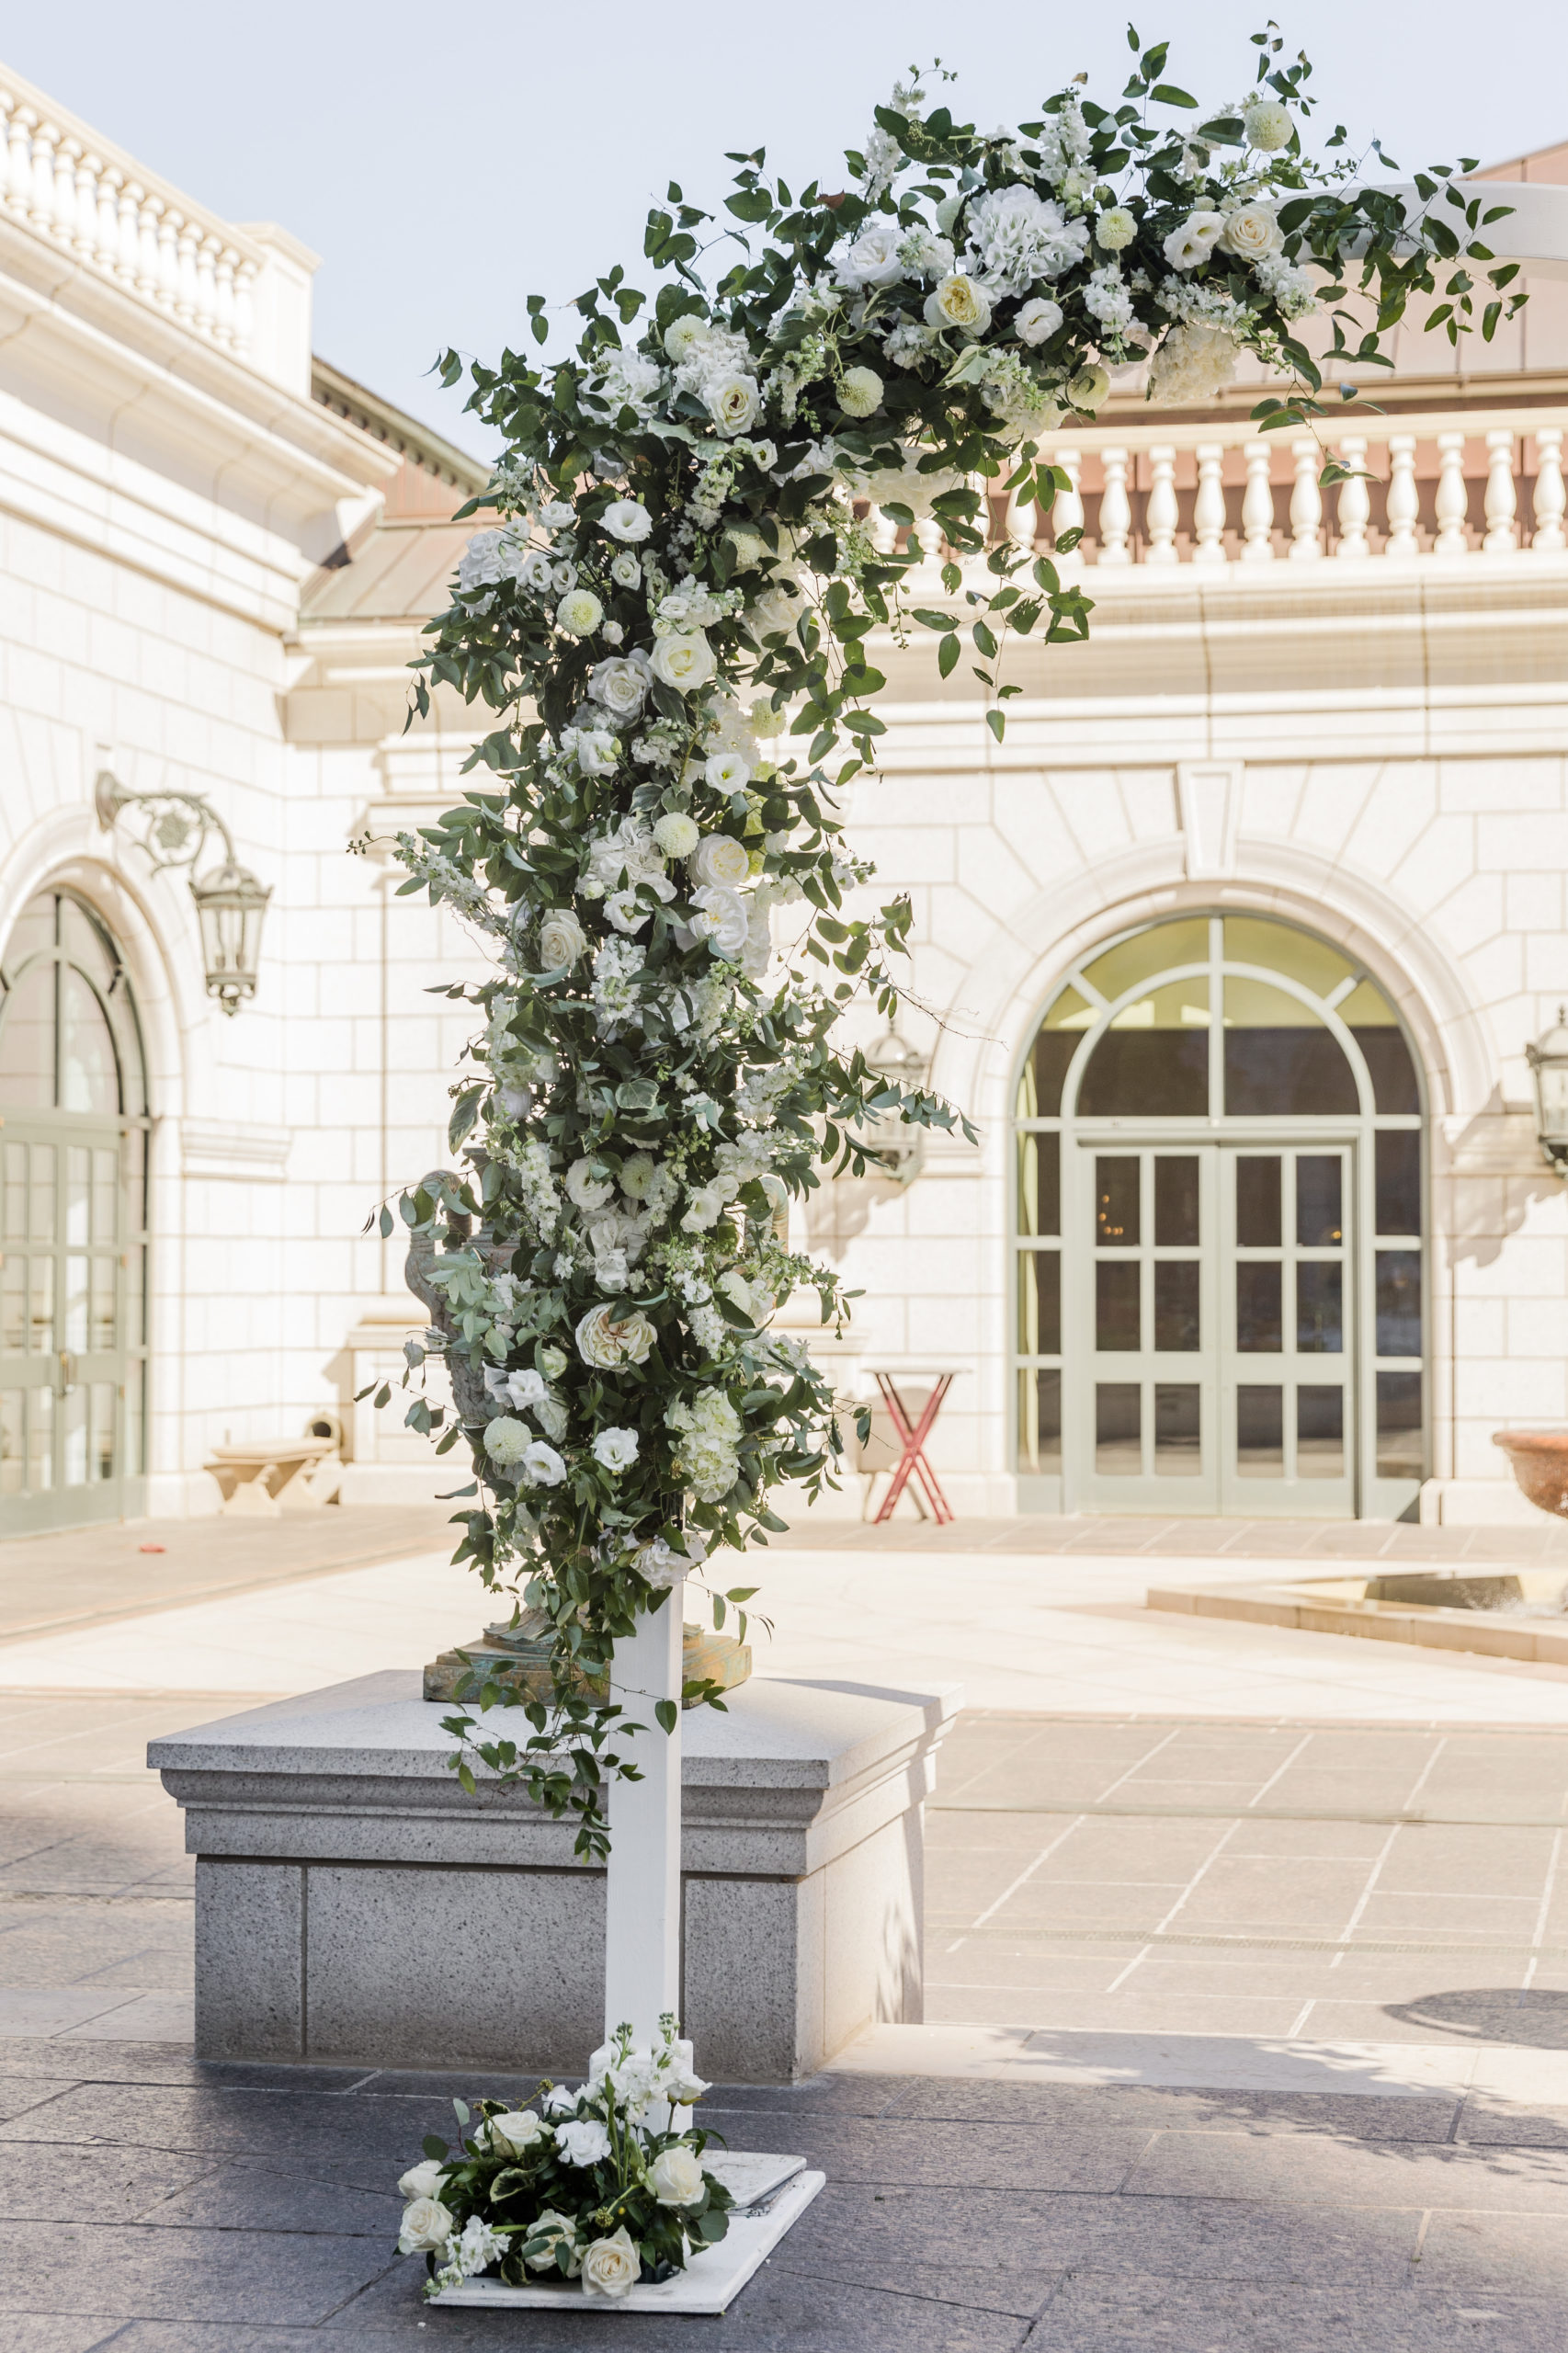 The stunning wedding arch lined with white roses for that luxurious feel, taken by Kyla Jeanette Photography